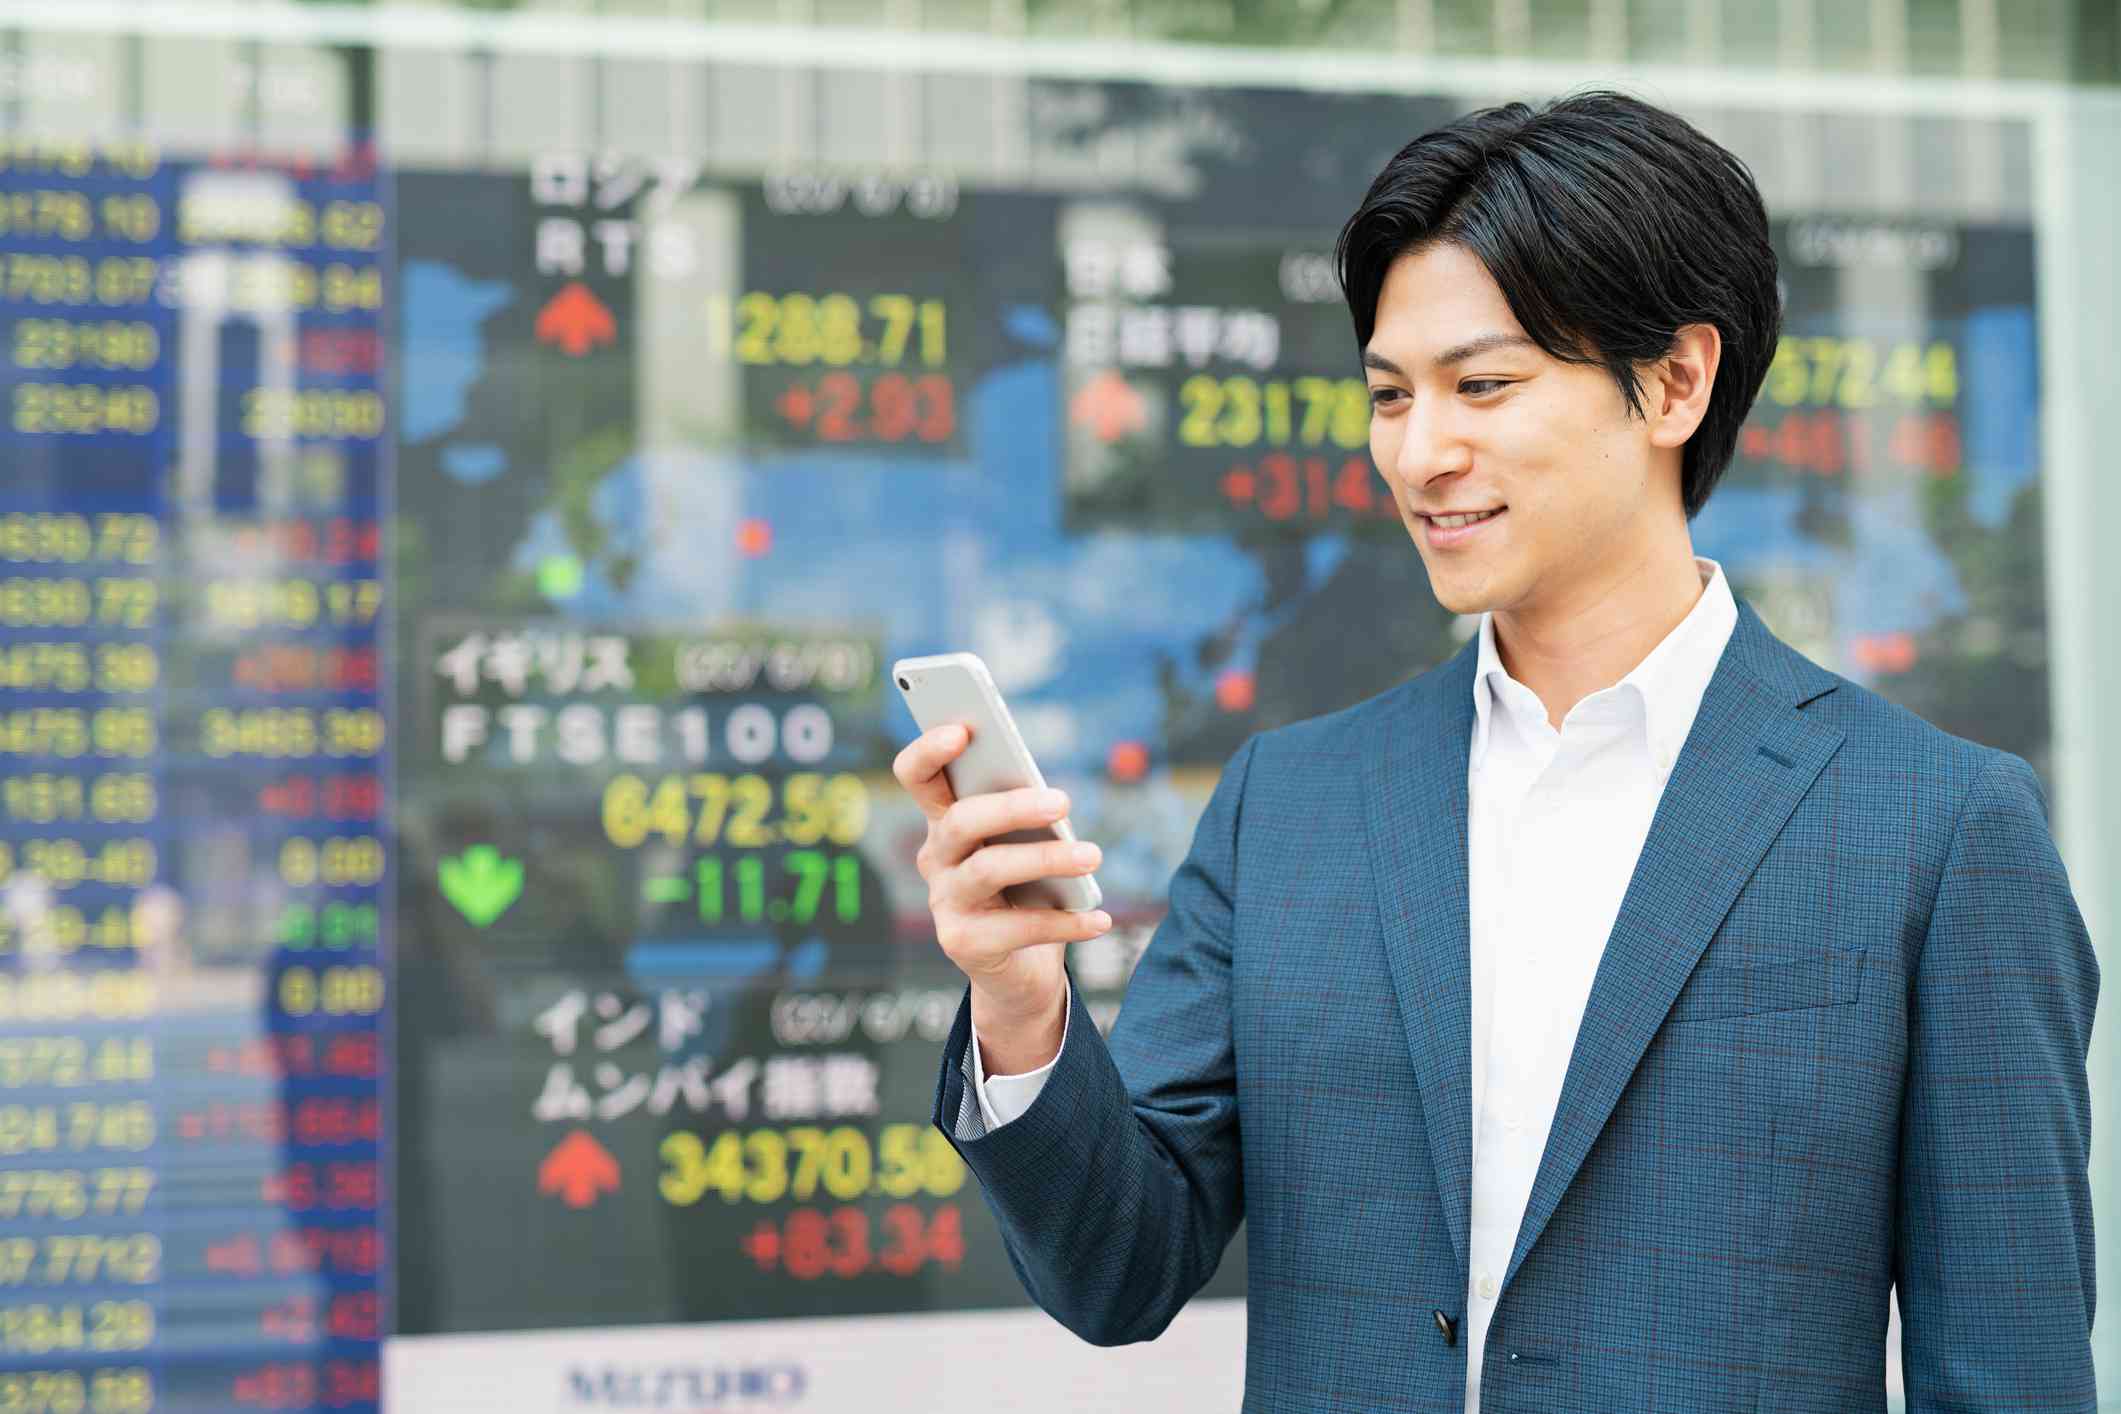 Asian man holding phone in front of stock ticker data